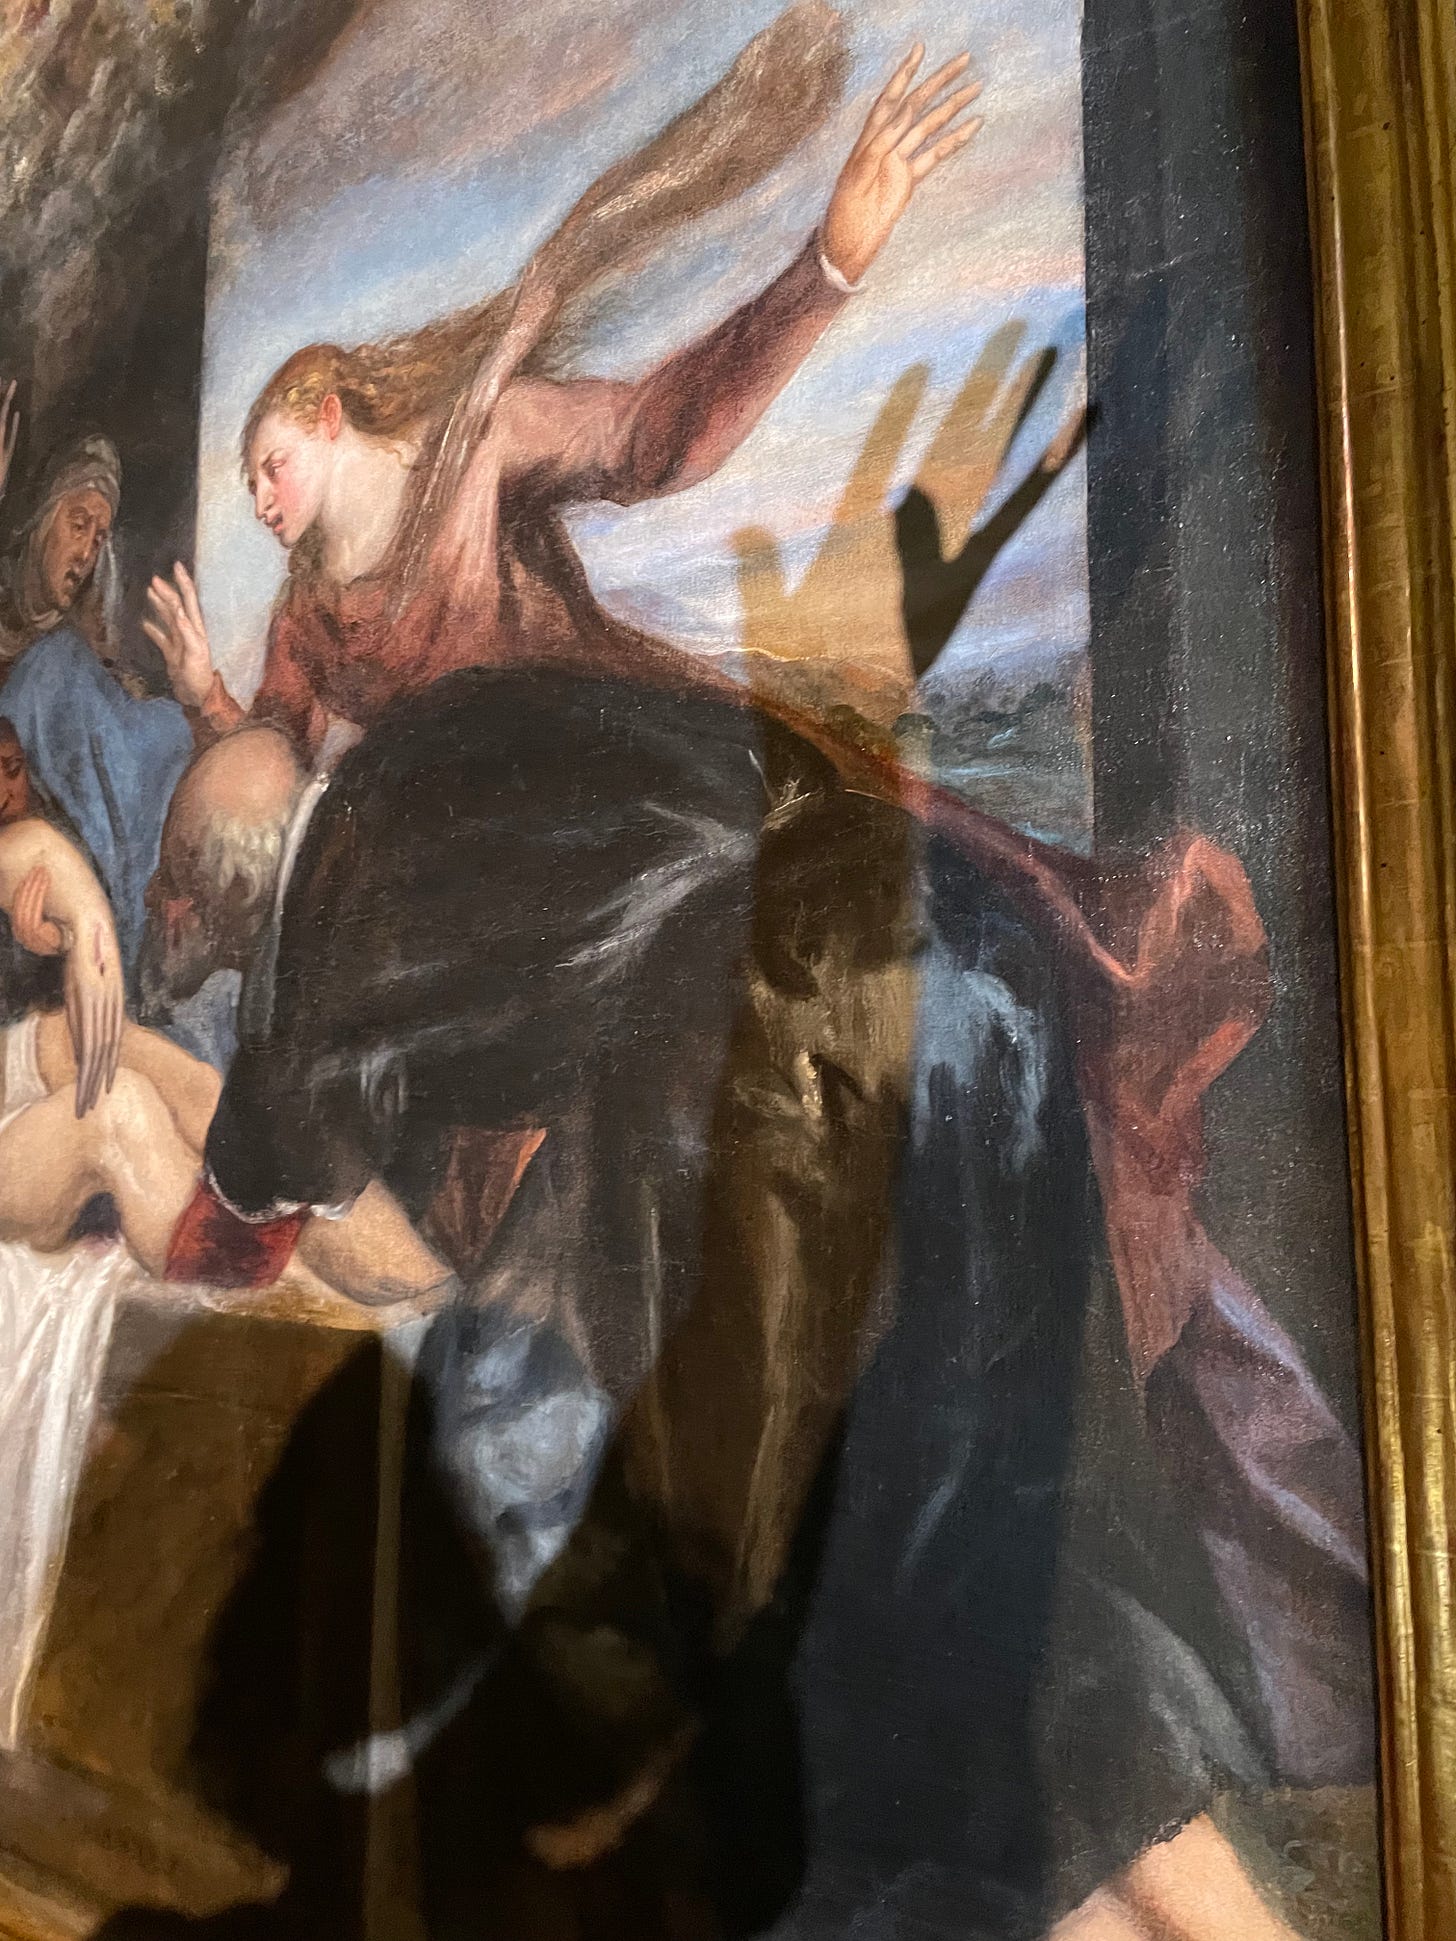 A painting of a woman with her arm in the air, with the shadow of a real person's arm overlaid